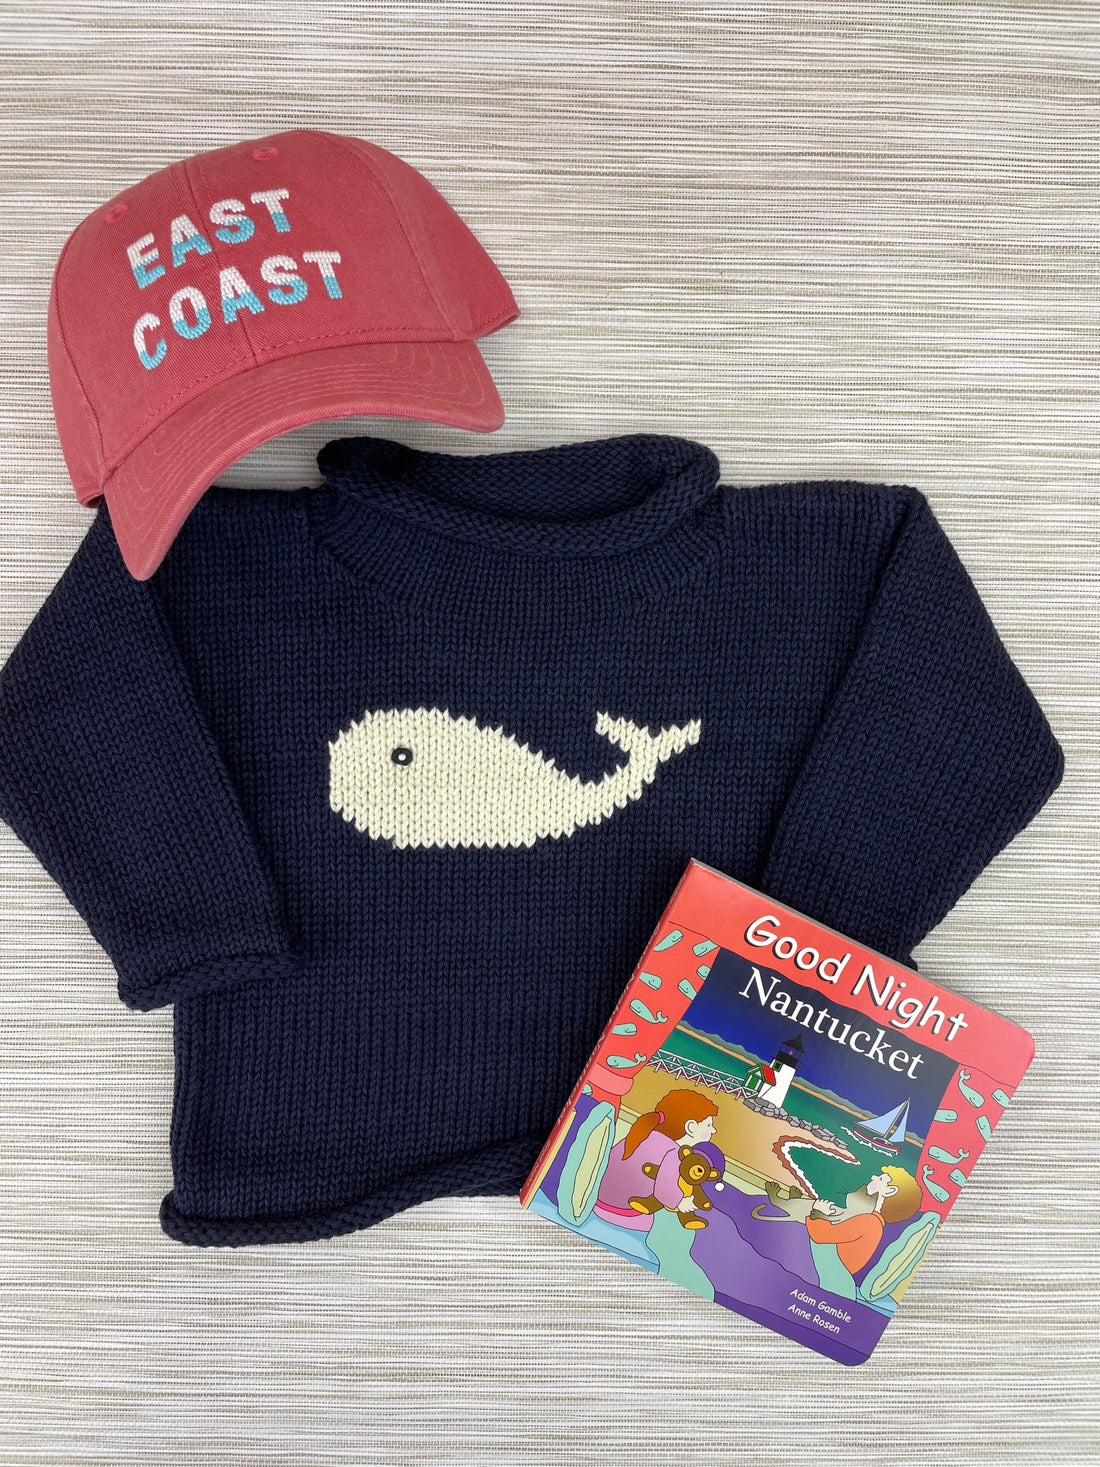 whale themed gift